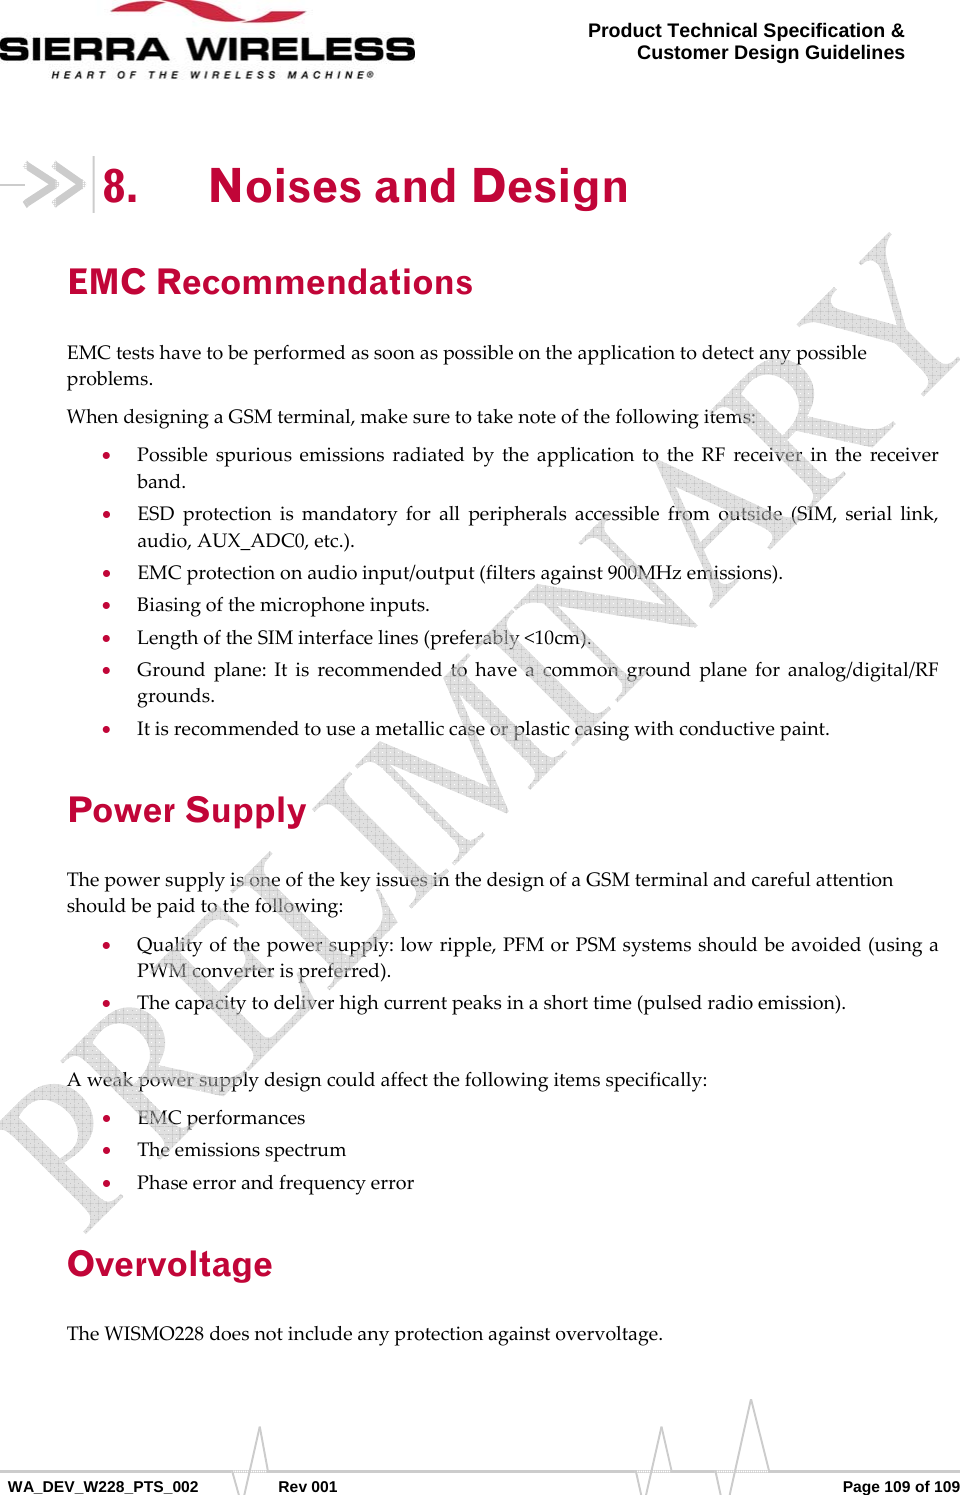      WA_DEV_W228_PTS_002 Rev 001  Page 109 of 109 Product Technical Specification &amp; Customer Design Guidelines 8. Noises and Design EMC Recommendations EMCtestshavetobeperformedassoonaspossibleontheapplicationtodetectanypossibleproblems.WhendesigningaGSMterminal,makesuretotakenoteofthefollowingitems:• PossiblespuriousemissionsradiatedbytheapplicationtotheRFreceiverinthereceiverband.• ESDprotectionismandatoryforallperipheralsaccessiblefromoutside(SIM,seriallink,audio,AUX_ADC0,etc.).• EMCprotectiononaudioinput/output(filtersagainst900MHzemissions).• Biasingofthemicrophoneinputs.• LengthoftheSIMinterfacelines(preferably&lt;10cm).• Groundplane:Itisrecommendedtohaveacommongroundplaneforanalog/digital/RFgrounds.• Itisrecommendedtouseametalliccaseorplasticcasingwithconductivepaint.Power Supply ThepowersupplyisoneofthekeyissuesinthedesignofaGSMterminalandcarefulattentionshouldbepaidtothefollowing:• Qualityofthepowersupply:lowripple,PFMorPSMsystemsshouldbeavoided(usingaPWMconverterispreferred).• Thecapacitytodeliverhighcurrentpeaksinashorttime(pulsedradioemission).Aweakpowersupplydesigncouldaffectthefollowingitemsspecifically:• EMCperformances• Theemissionsspectrum• PhaseerrorandfrequencyerrorOvervoltage TheWISMO228doesnotincludeanyprotectionagainstovervoltage.   